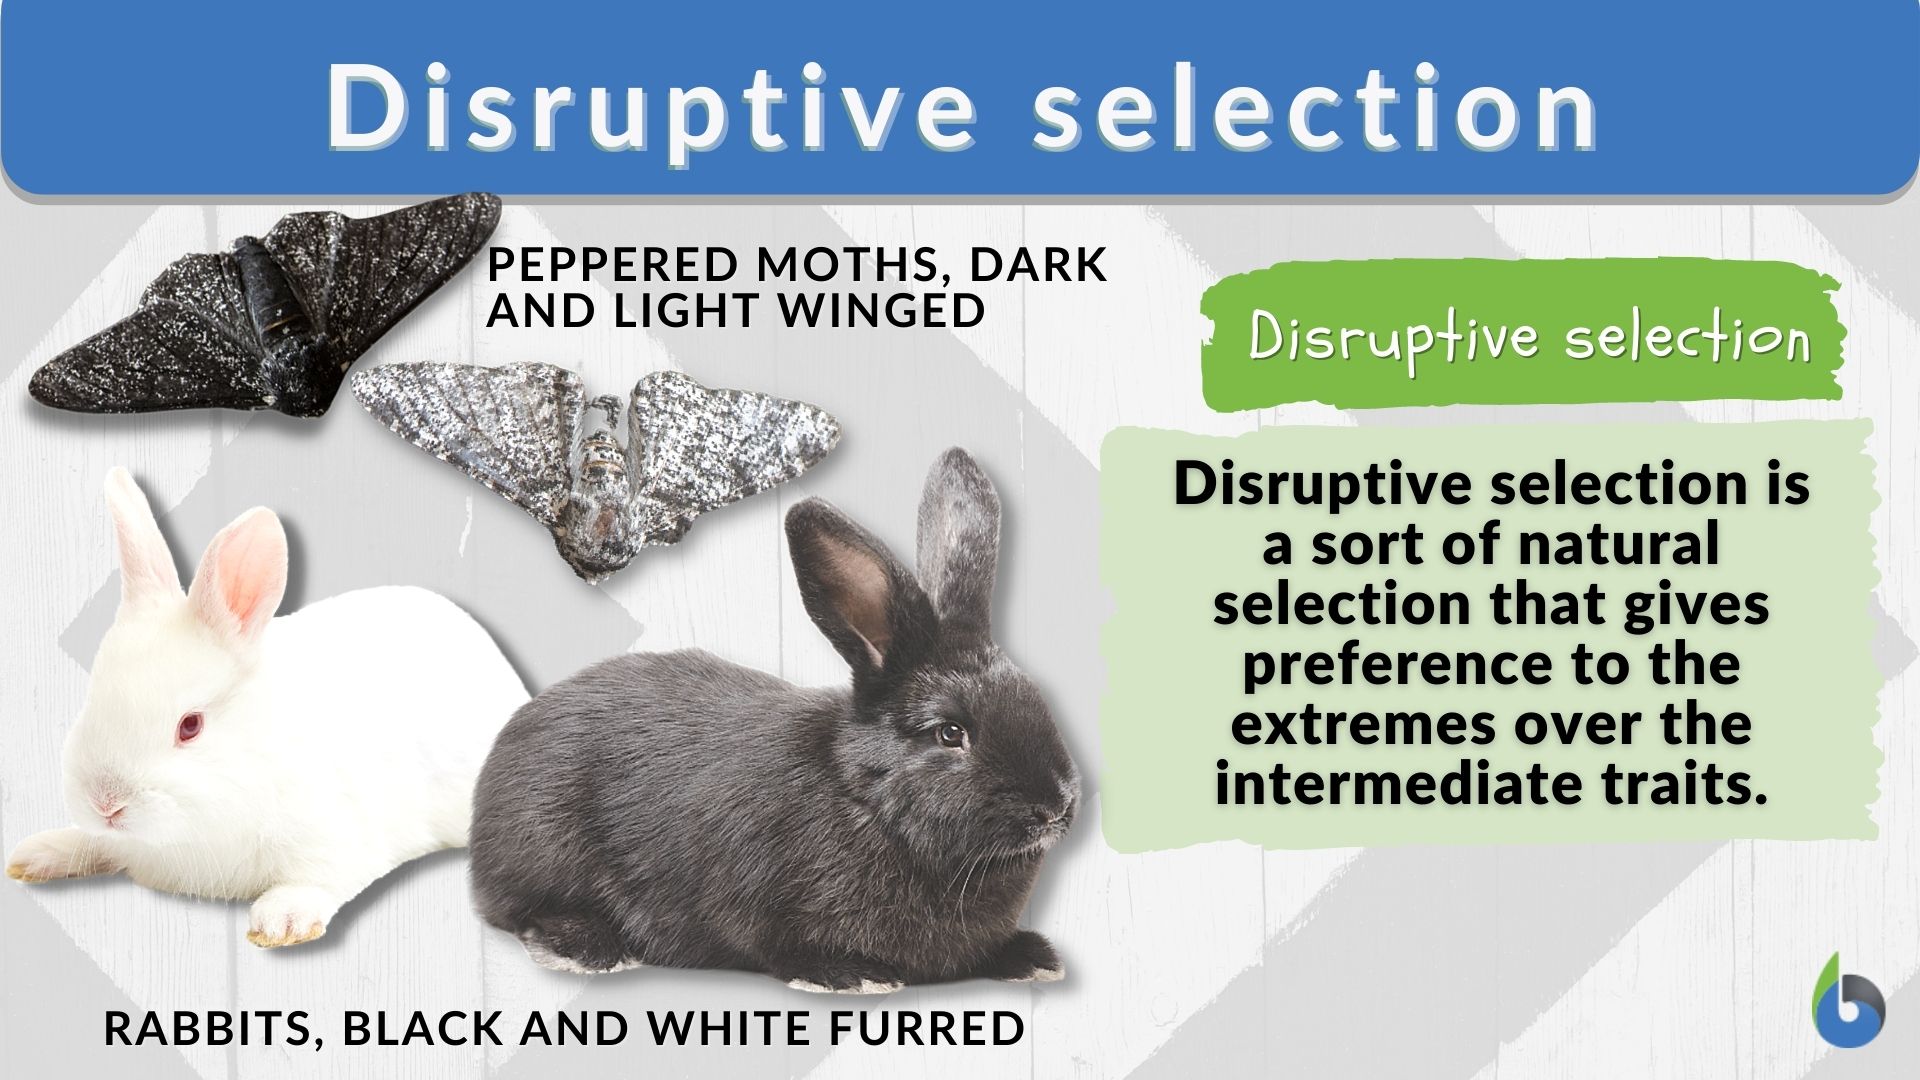 Disruptive Selection - Definition and Examples - Biology Online Dictionary